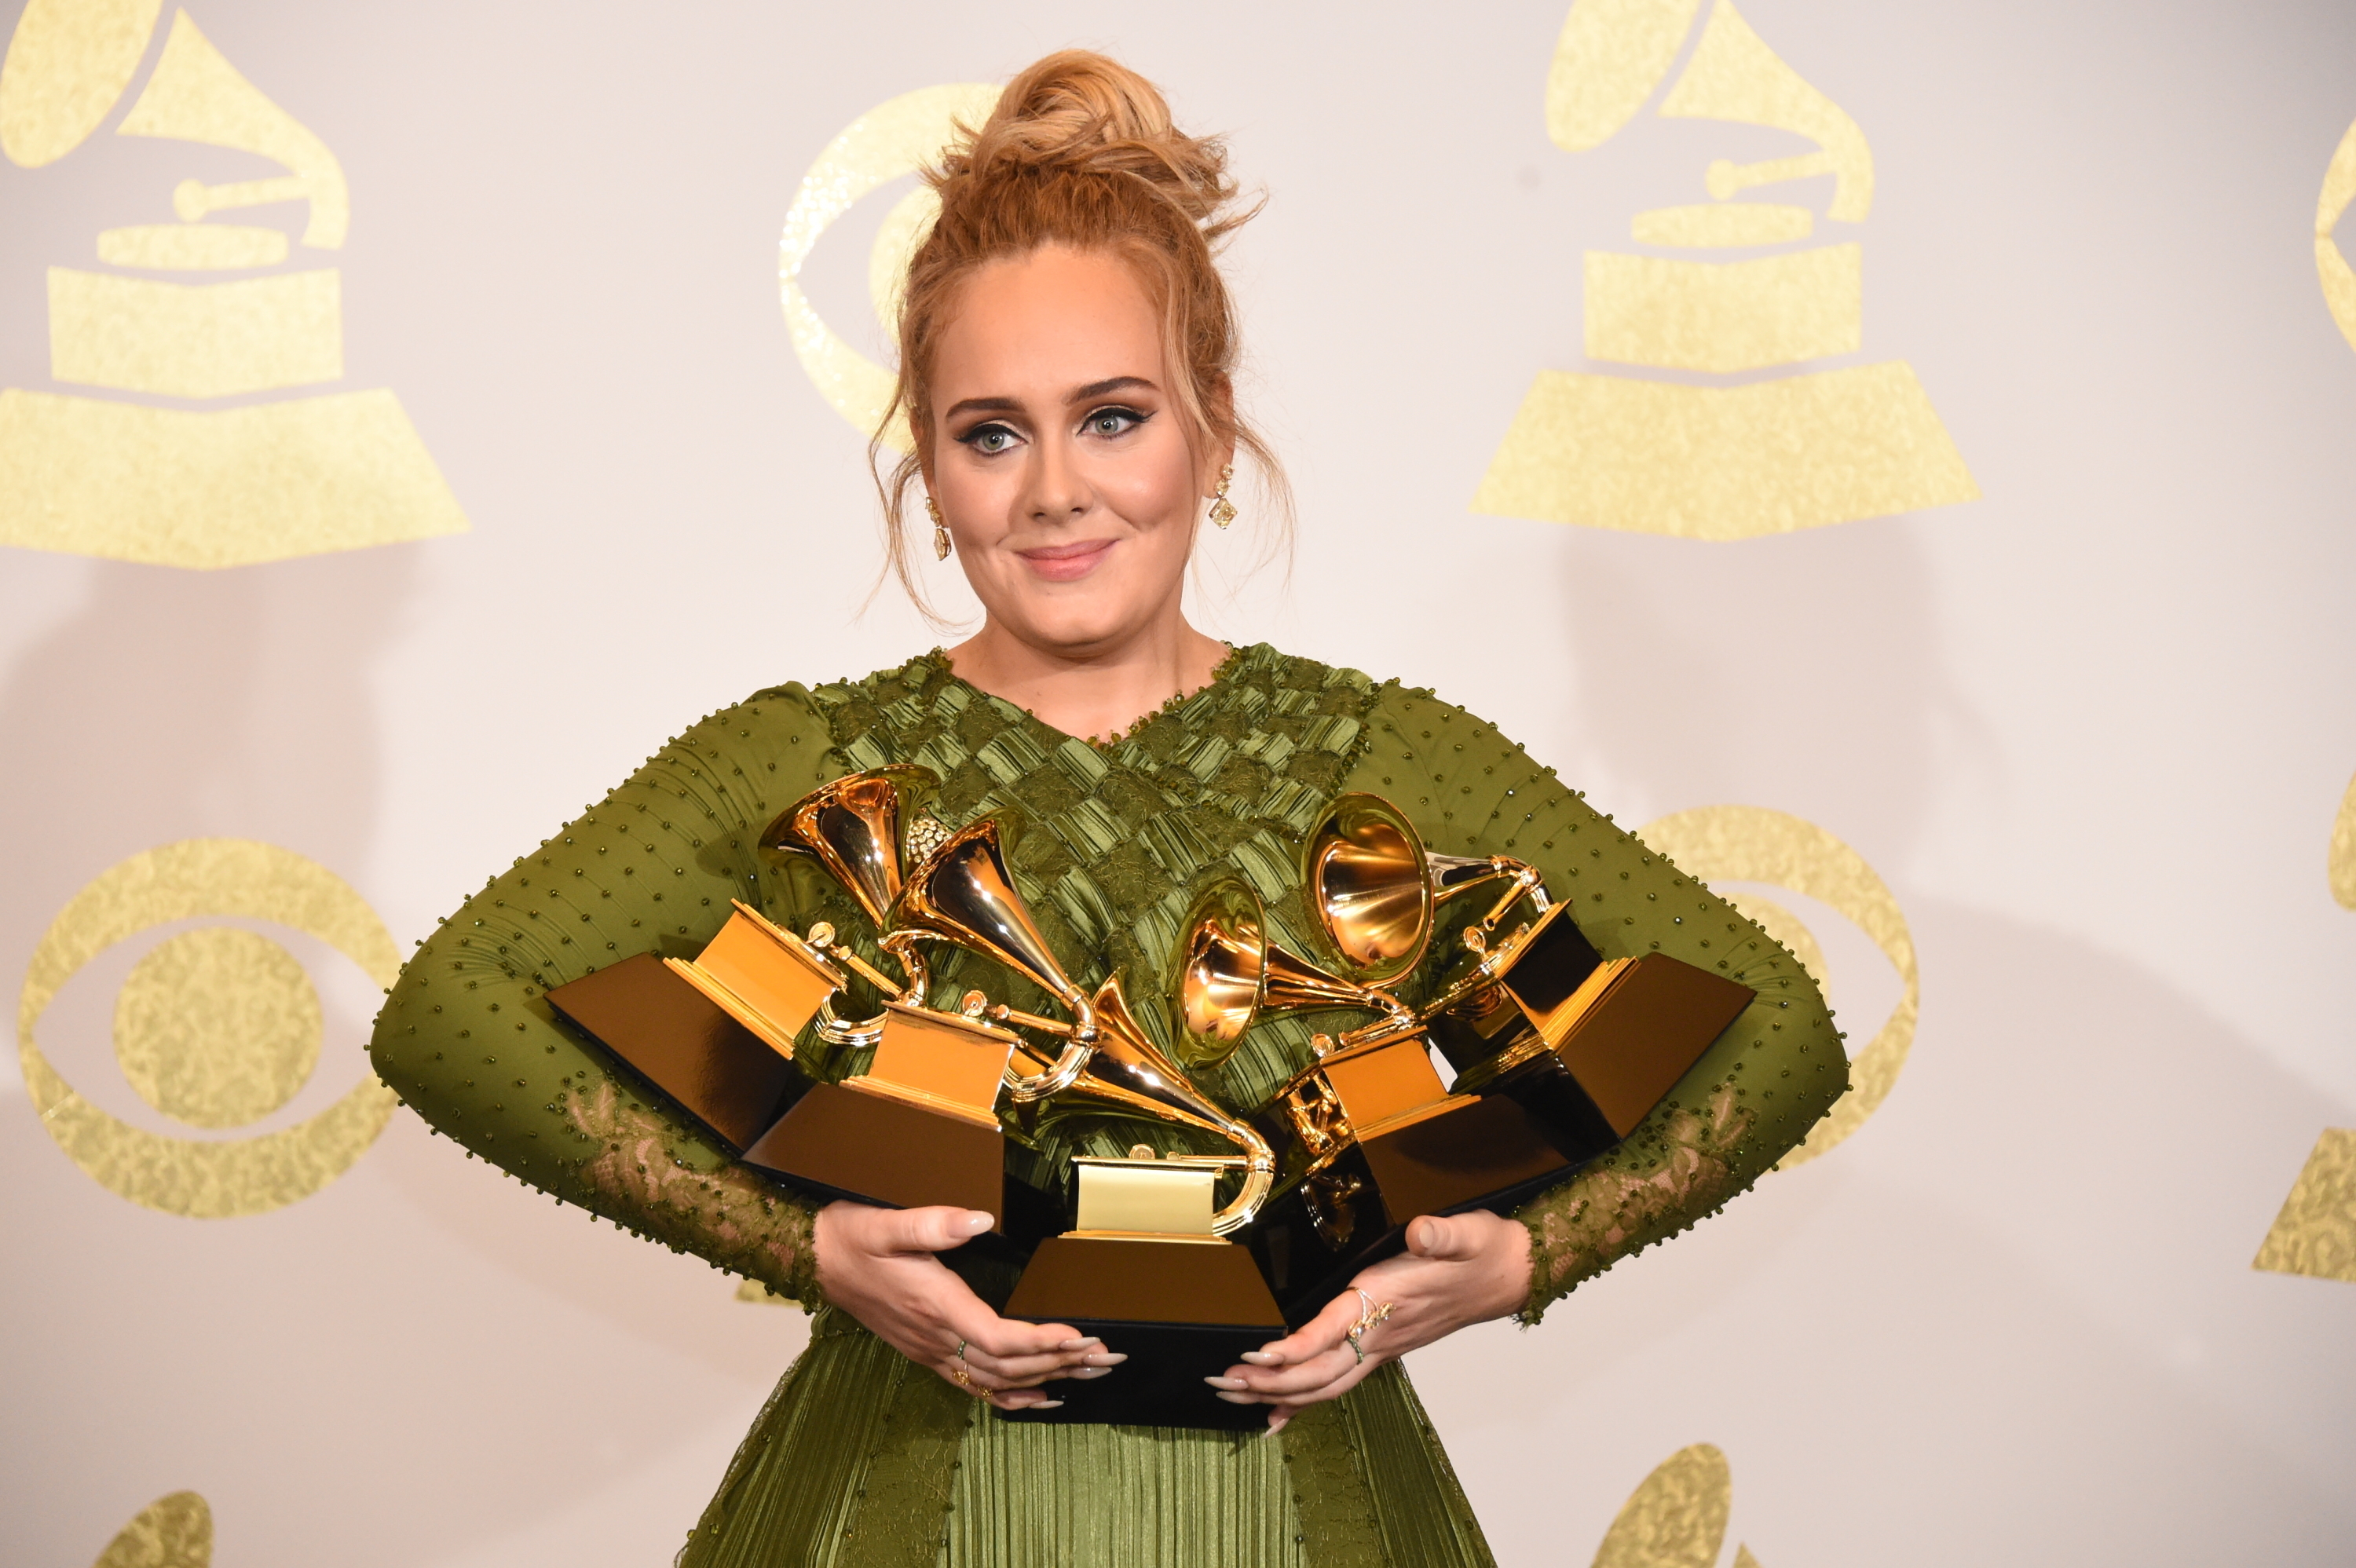 Adele with her four Grammys in her arms